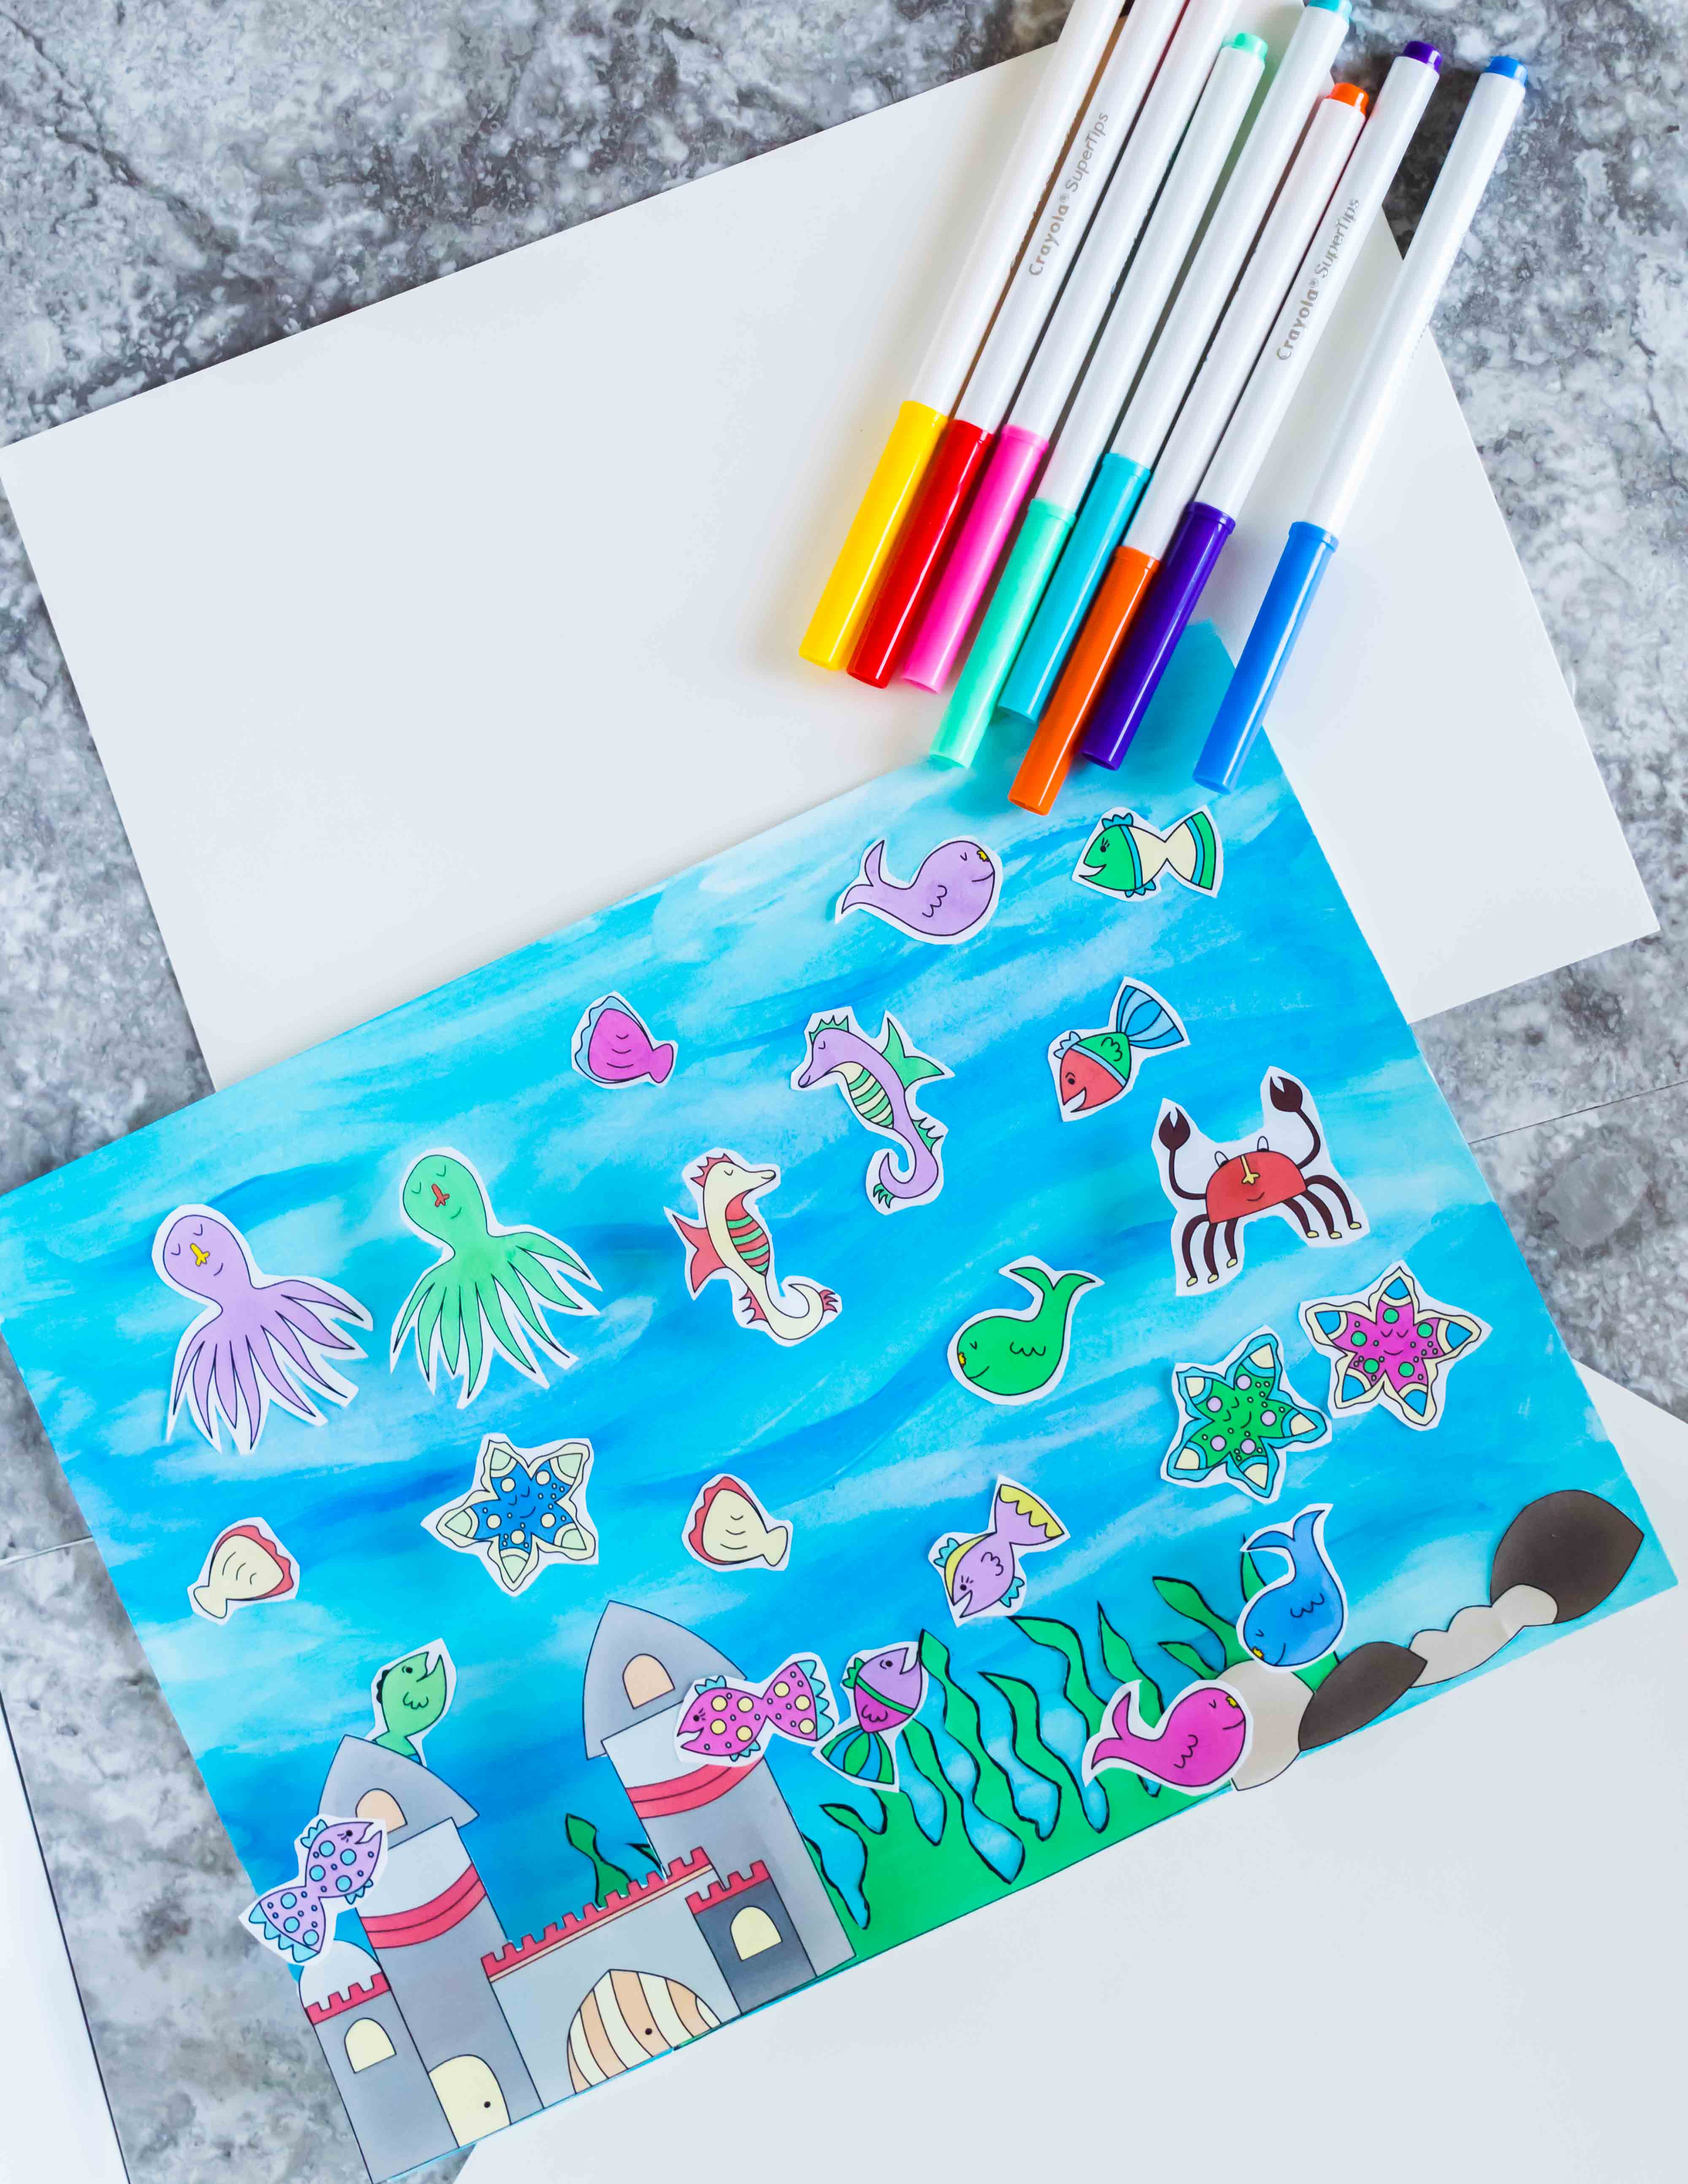 Easy and Cute Fish Tank Craft for Kids Free Printable